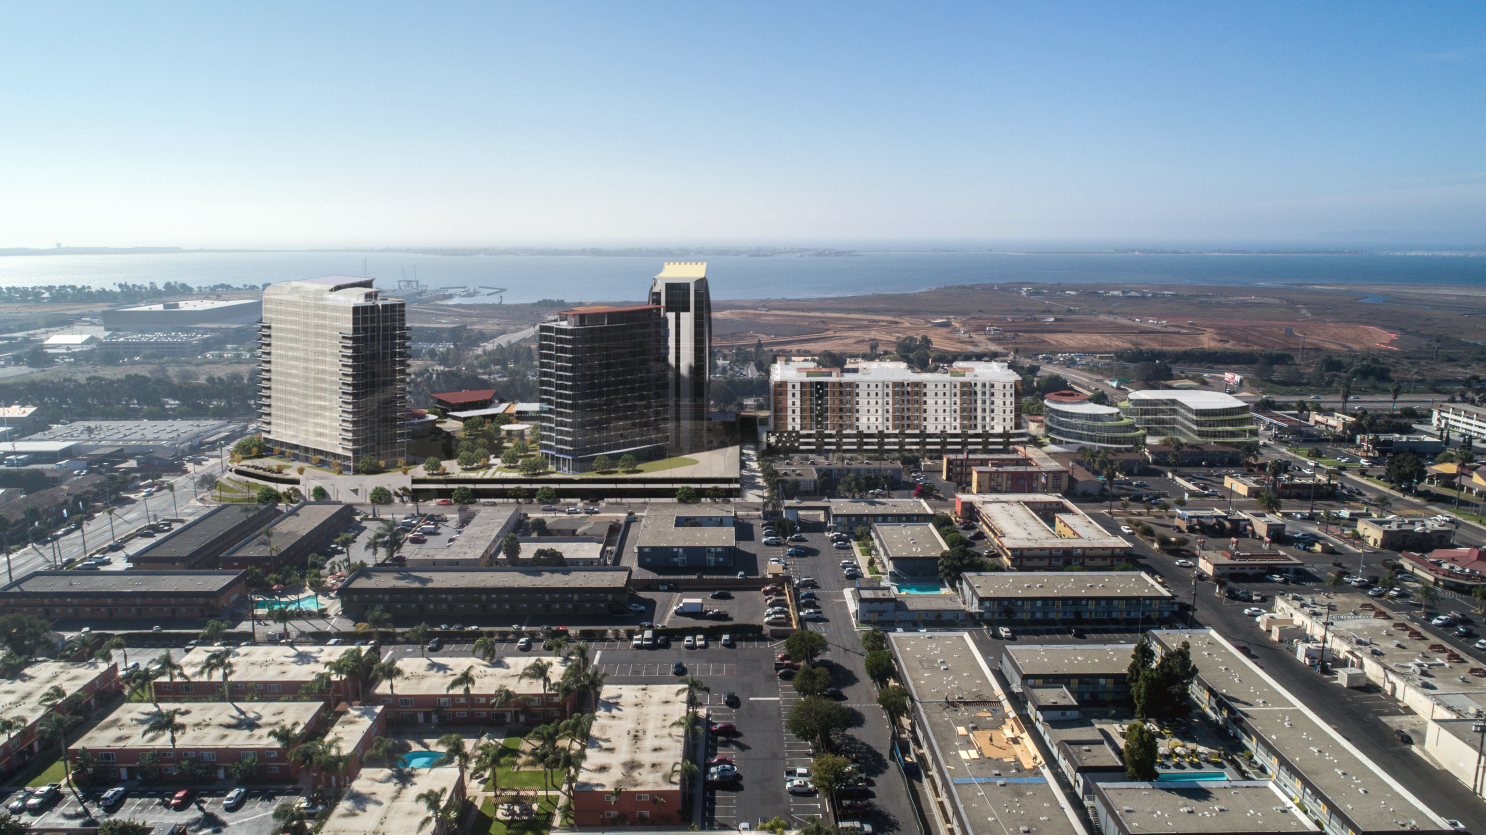 Chula Vista doesn't have a skyline. This developer hopes to change